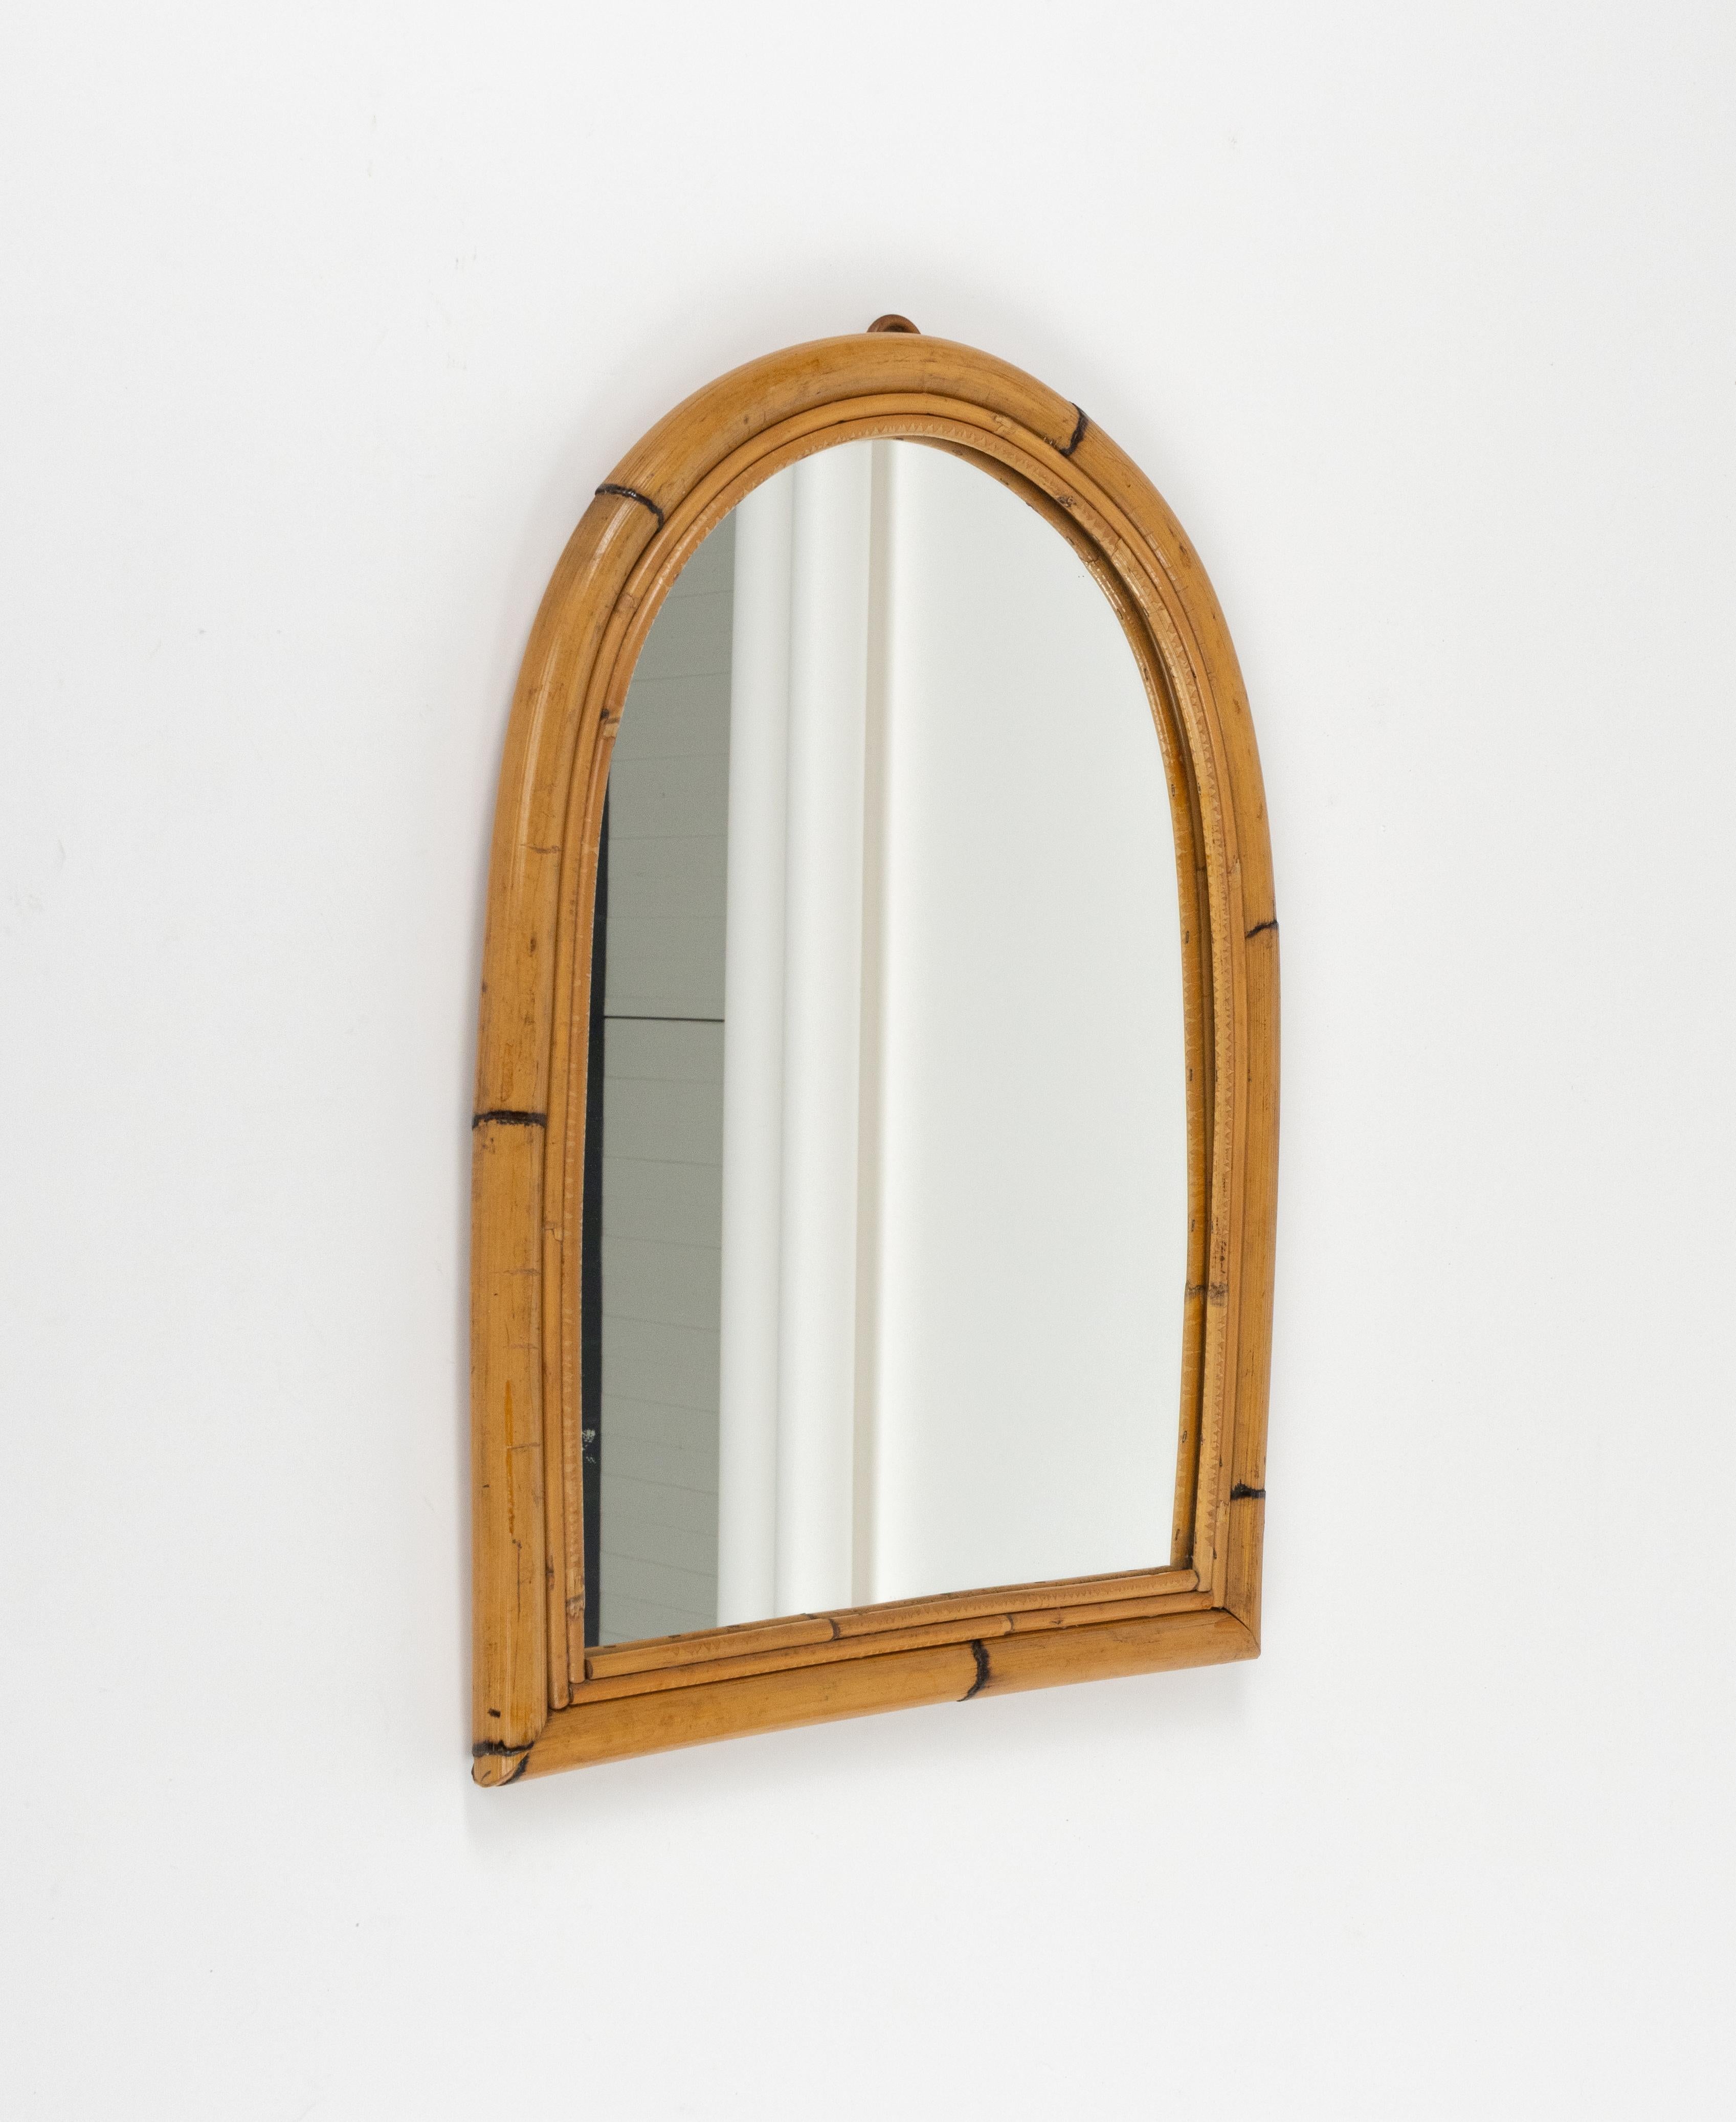 Midcentury Rattan and Bamboo Arched Wall Mirror, Italy 1960s In Good Condition For Sale In Rome, IT